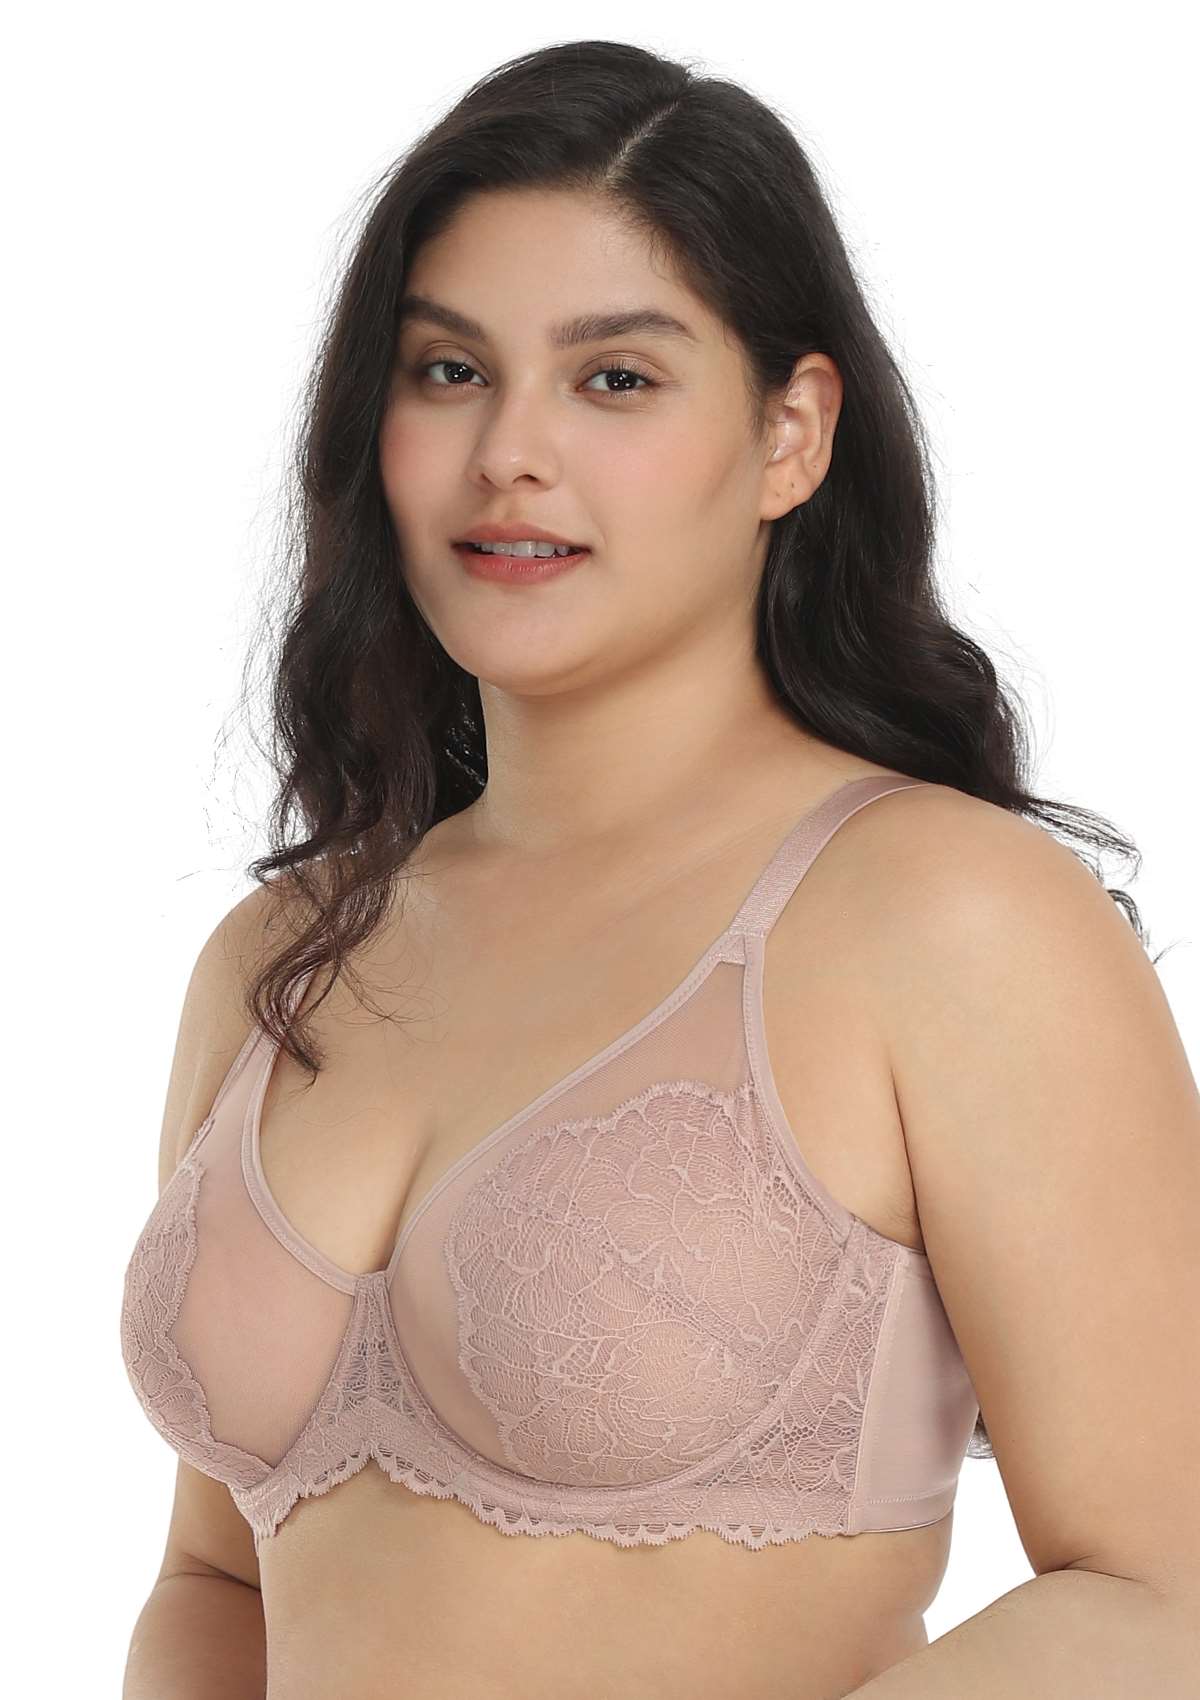 HSIA Blossom Lace Bra And Panties Set: Best Bra For Large Busts - Dark Pink / 44 / G